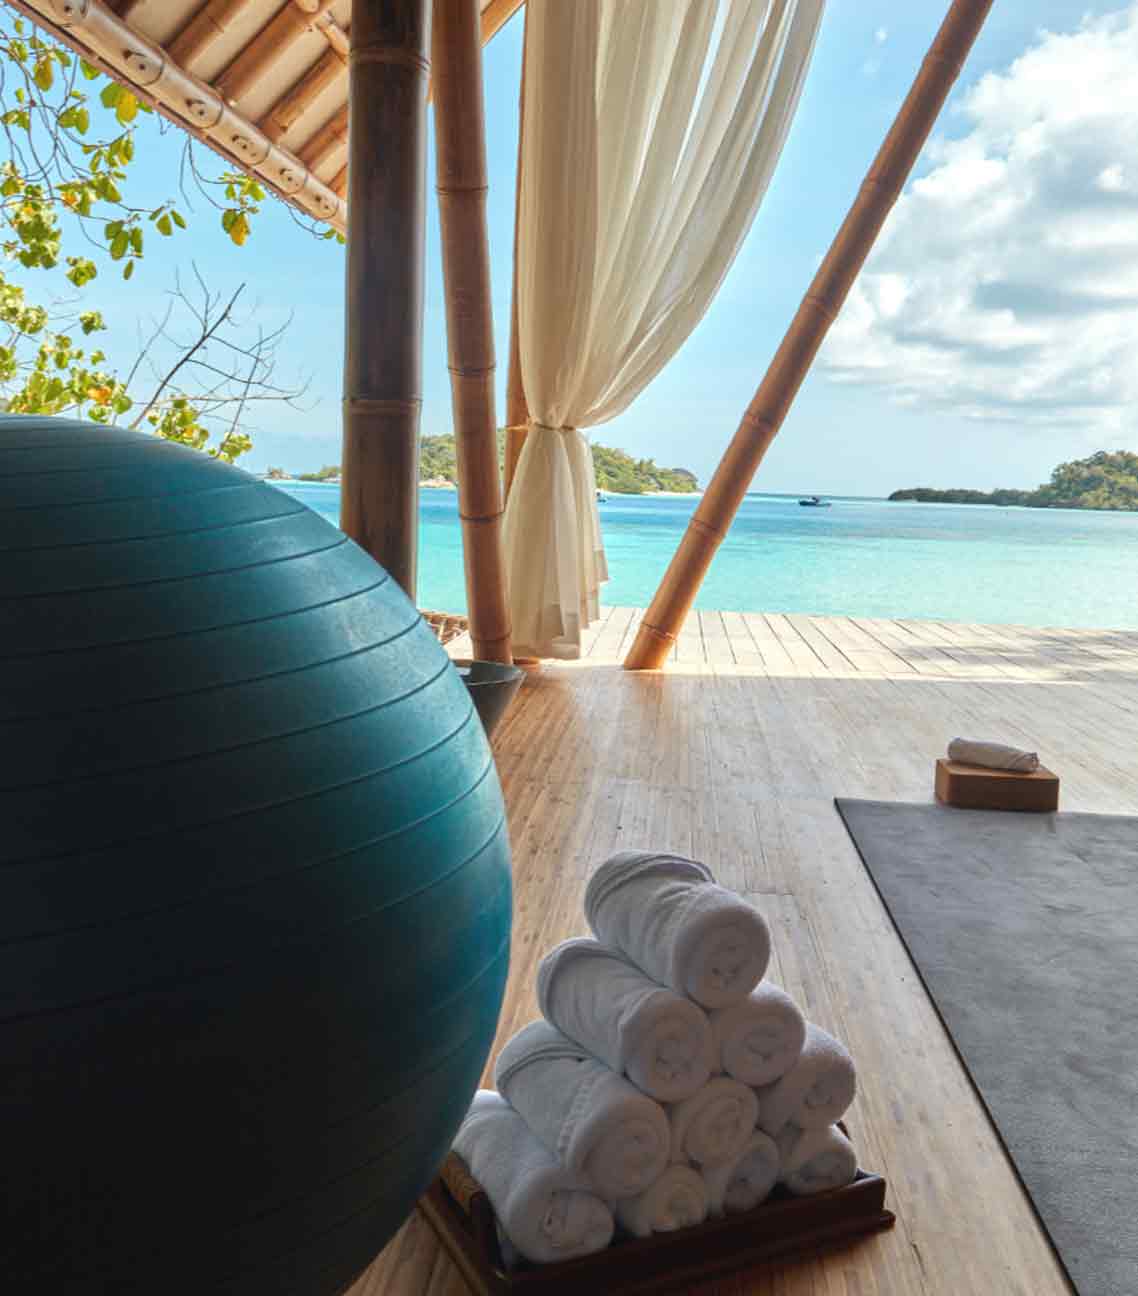 Aura wellbeing centre and pilates deck Bawah Reserve, Indonesia.